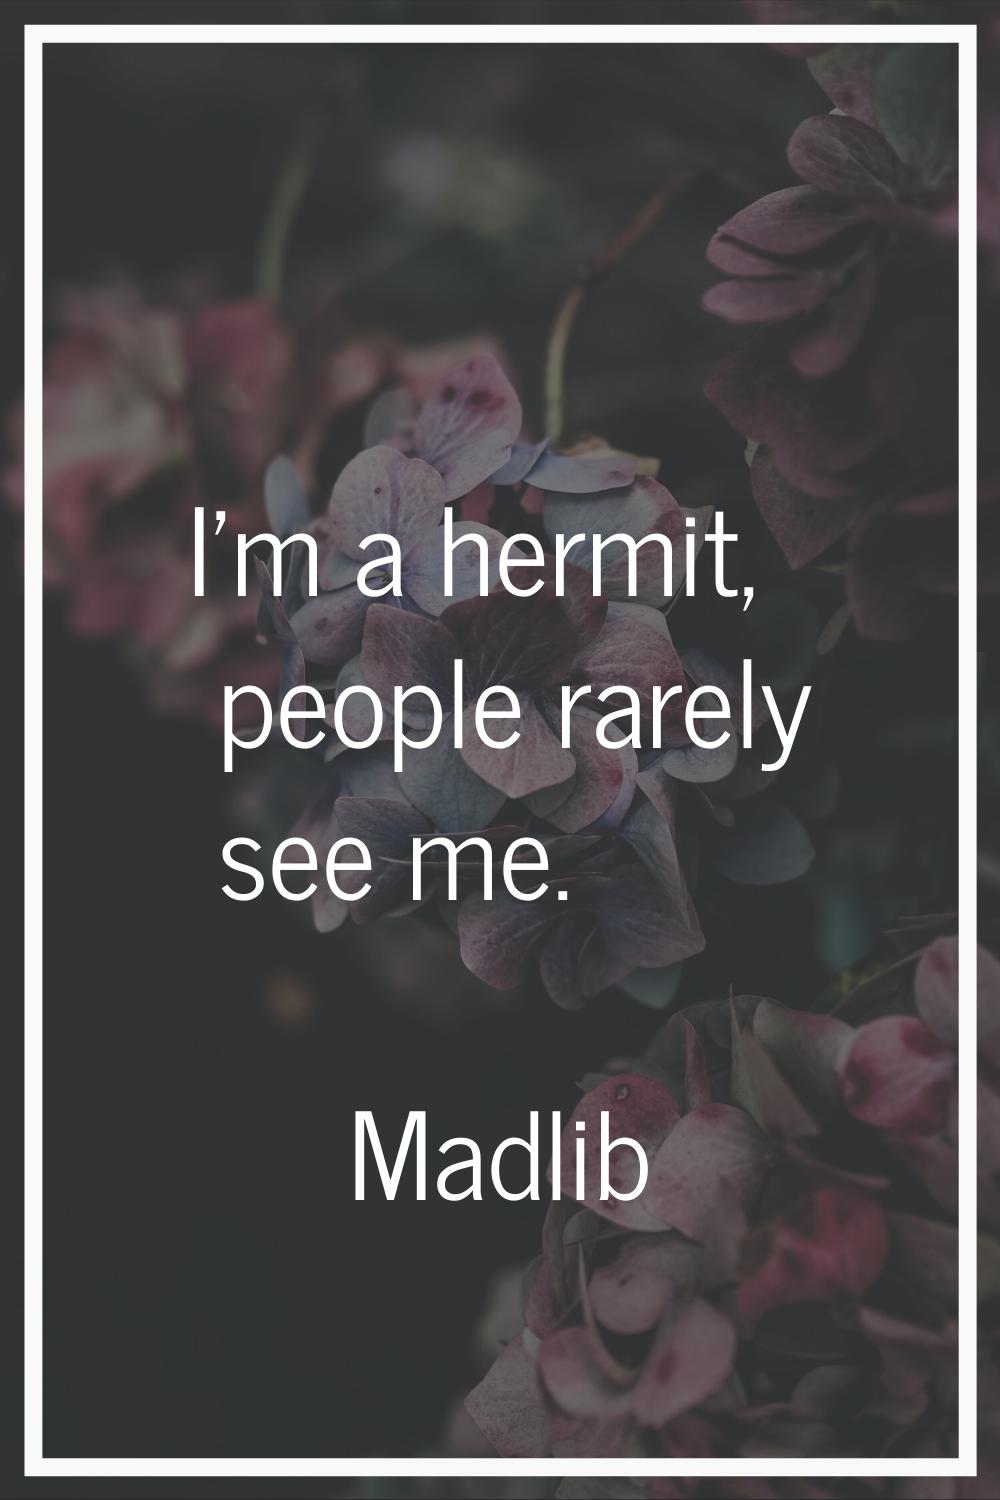 I'm a hermit, people rarely see me.